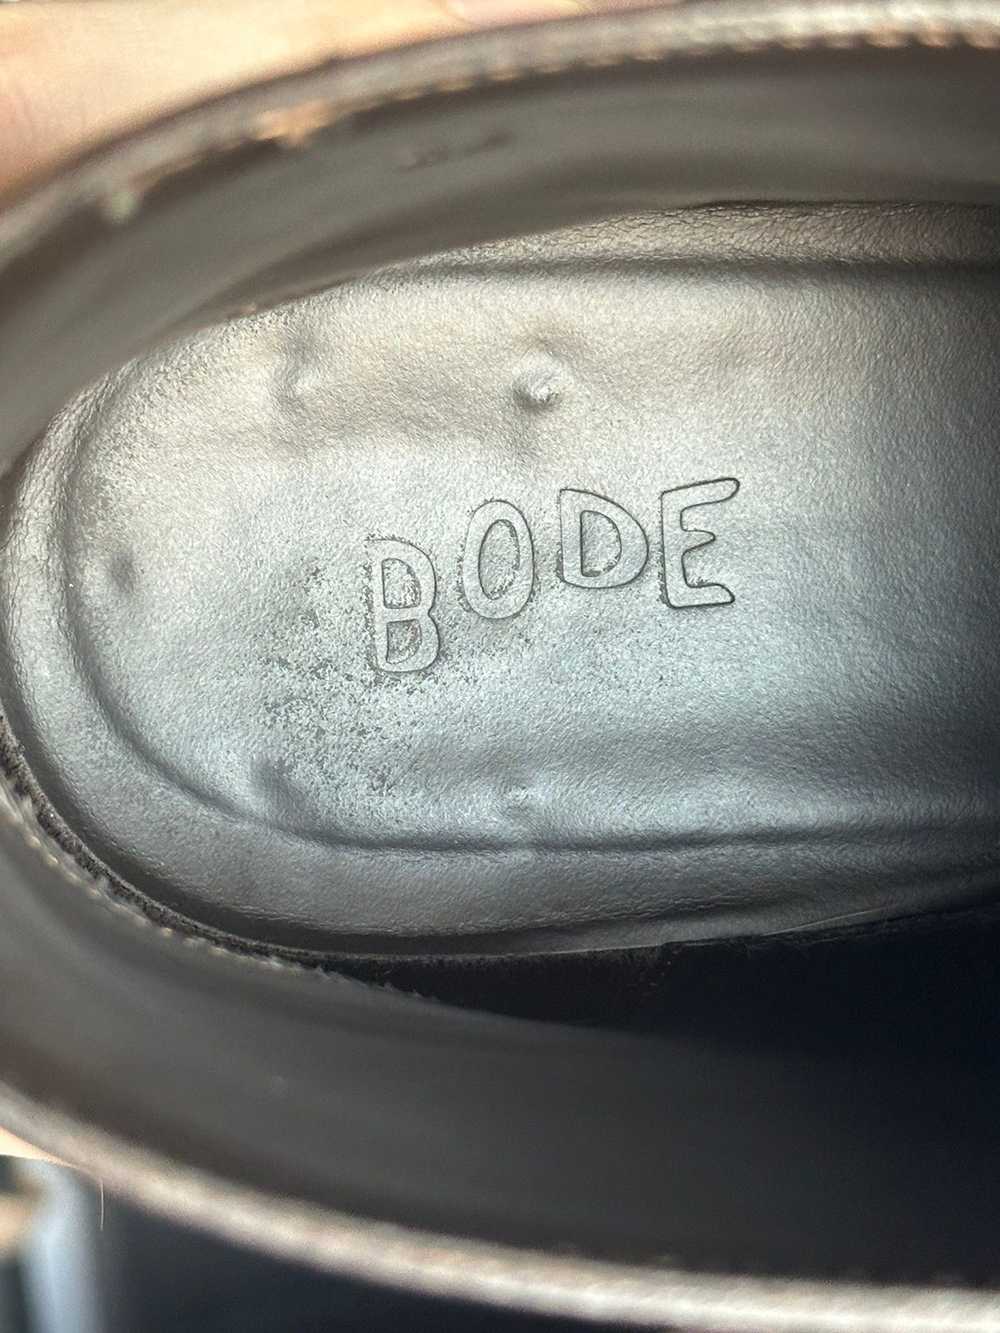 Bode Brown Hampshire Boots Size 45 - image 8